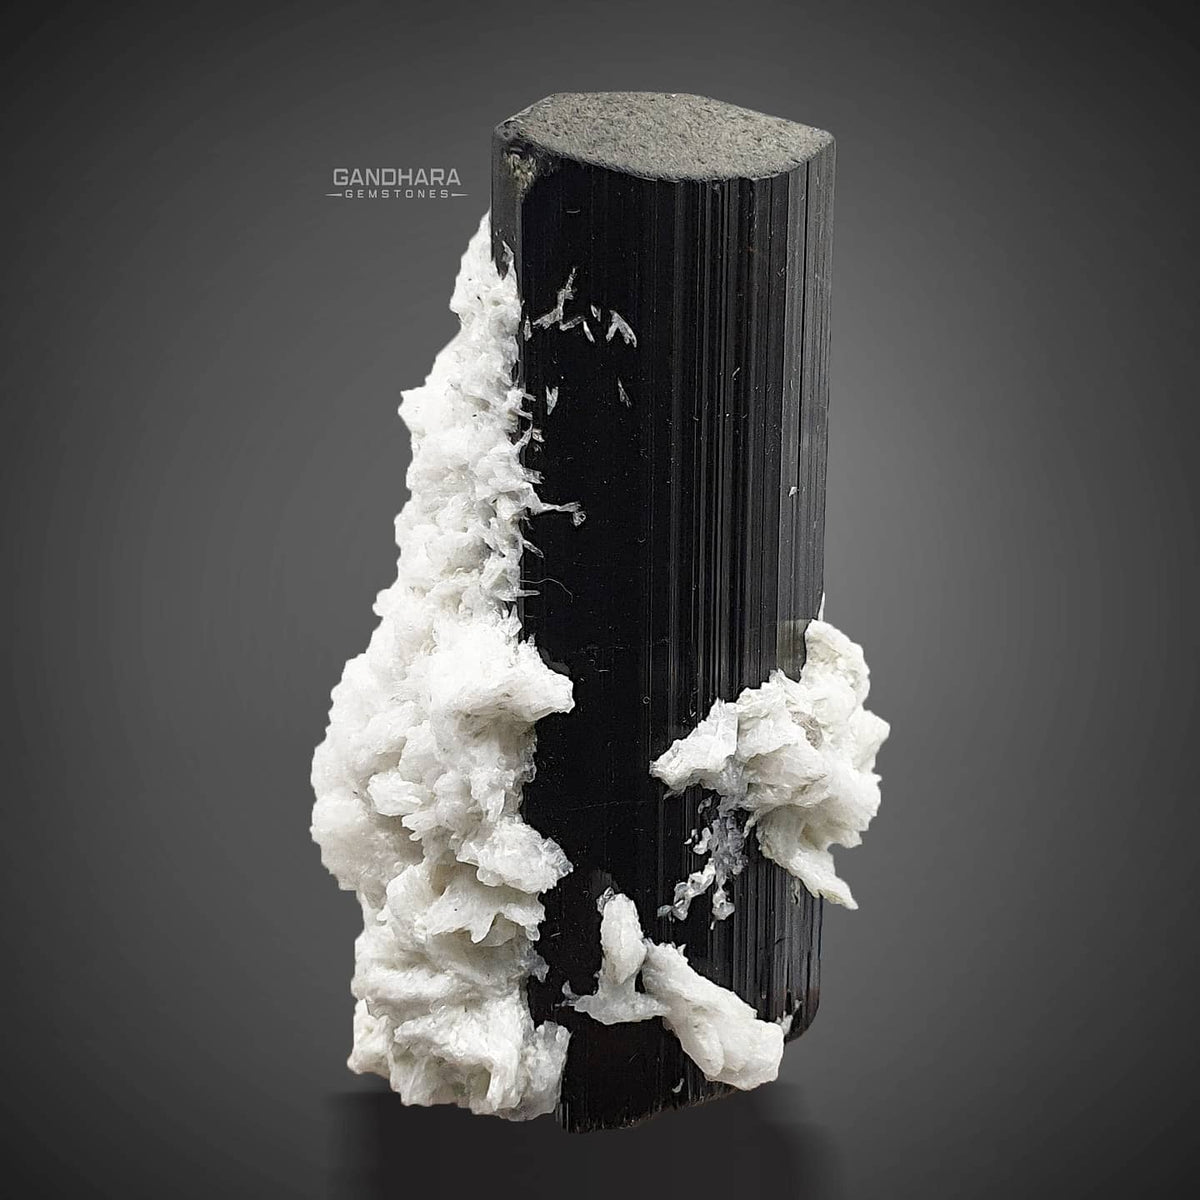 Aesthetic Doubley Terminated Lusterious Schorl with Cleavelandite